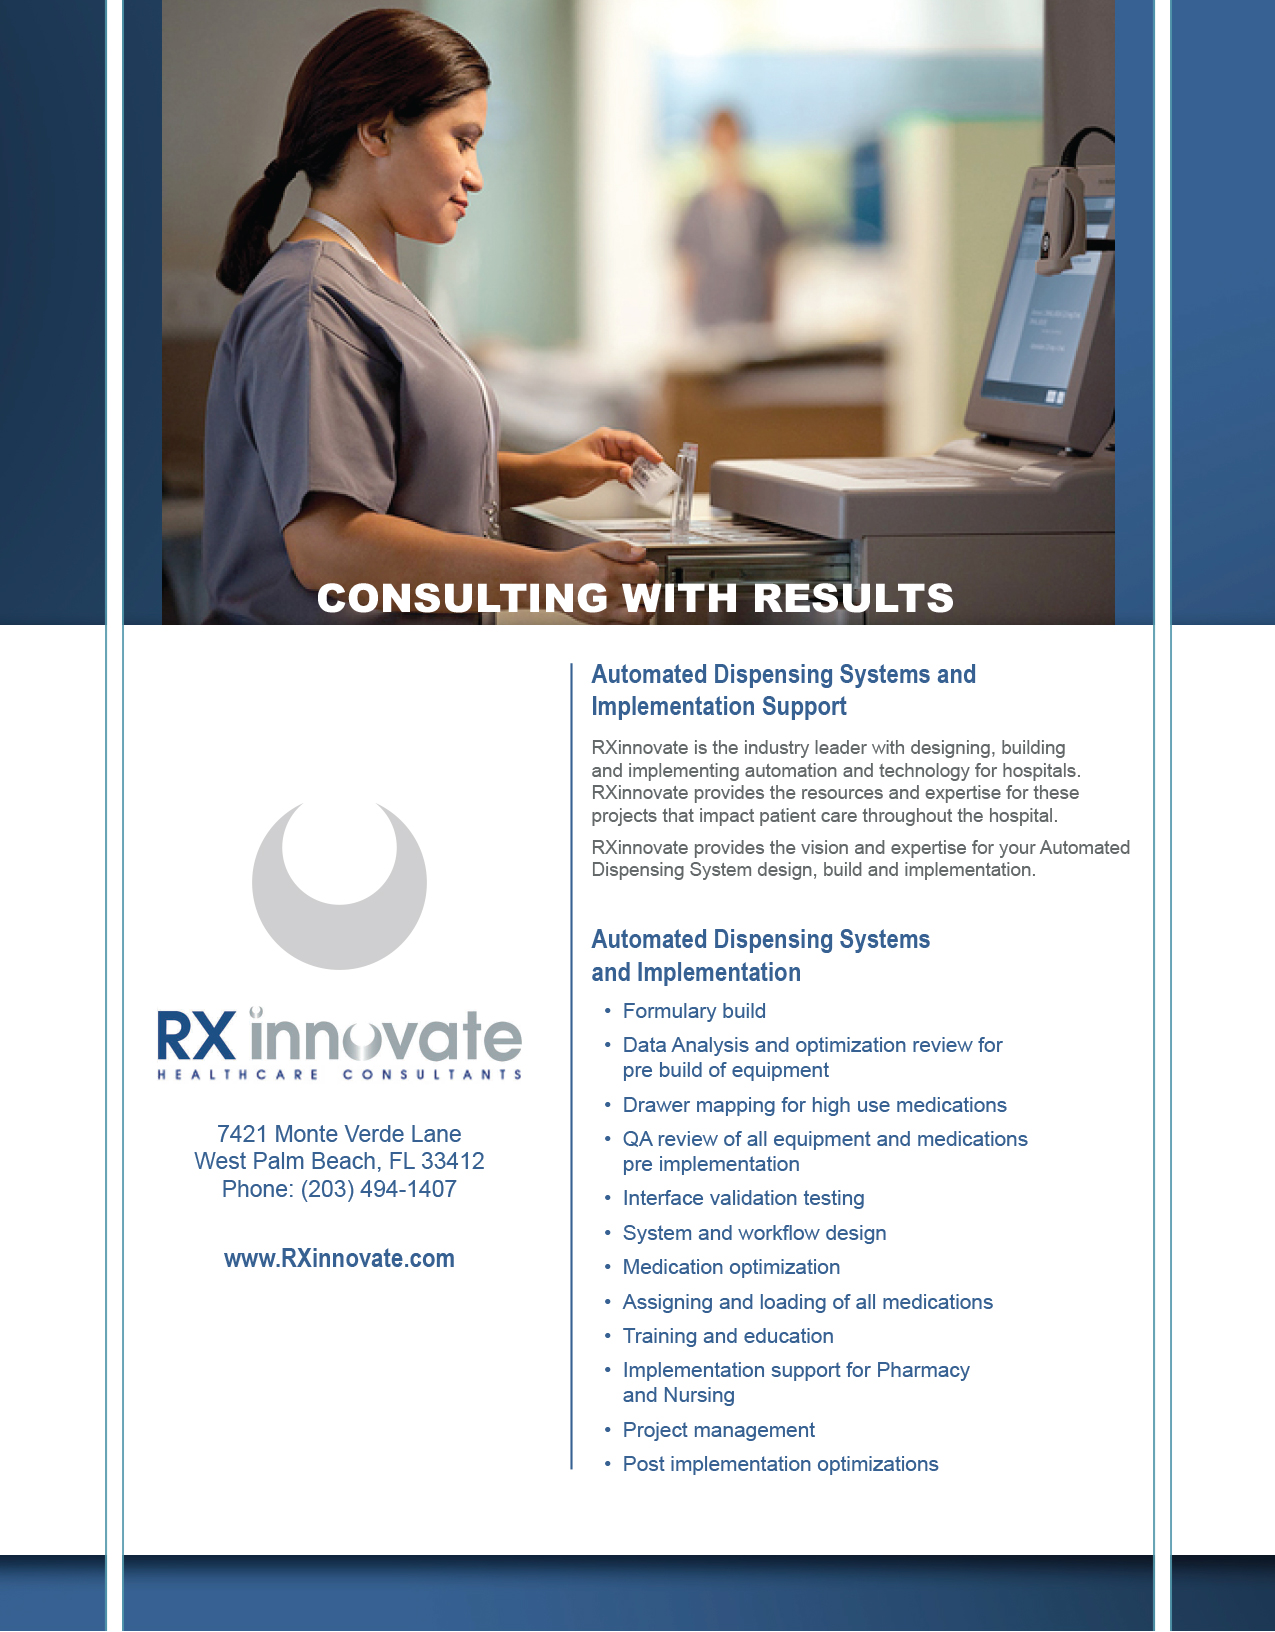 RXinnovate Consulting